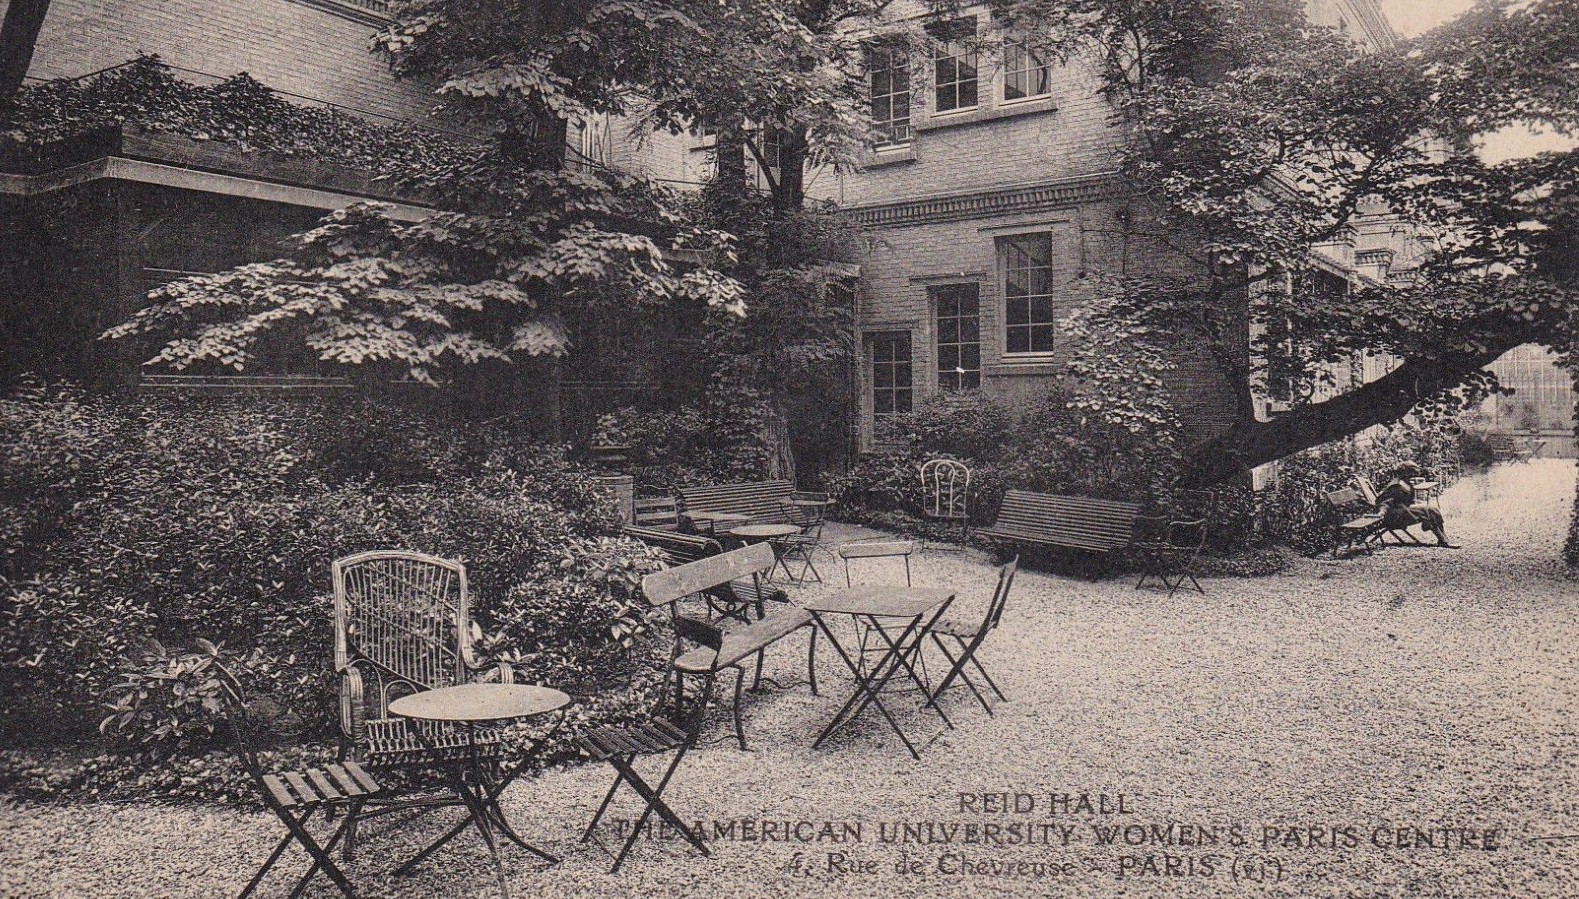 A black and white photograph of an 18th century building in a garden courtyard with benches. 